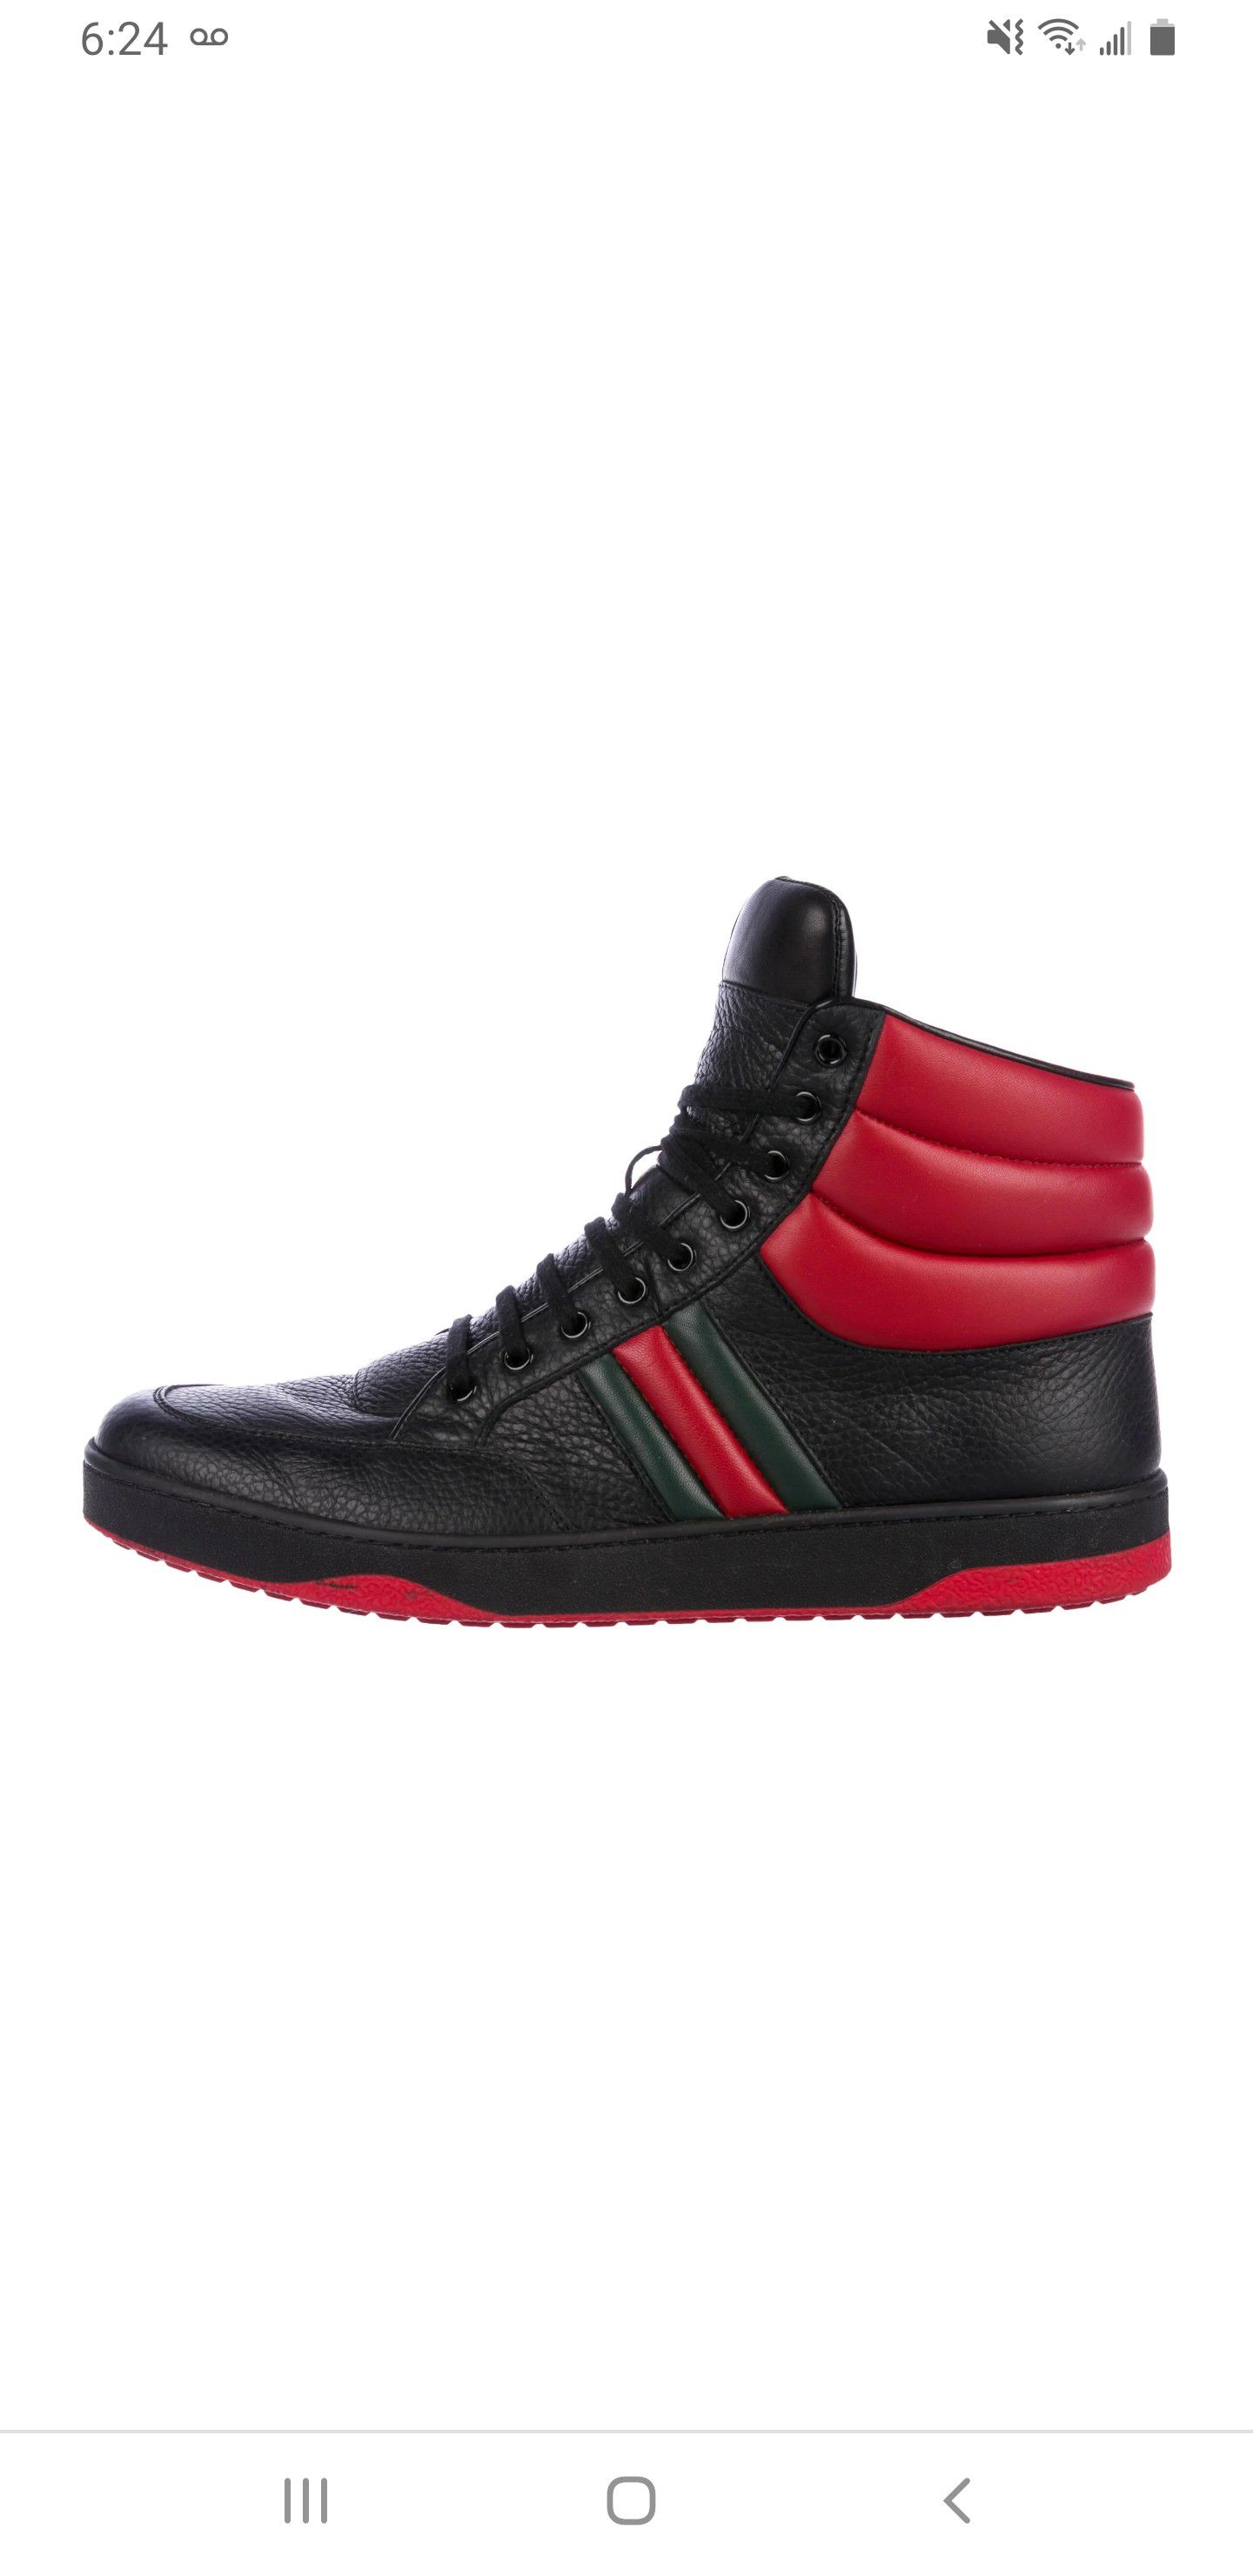 Gucci Sneakers mens size 13 US